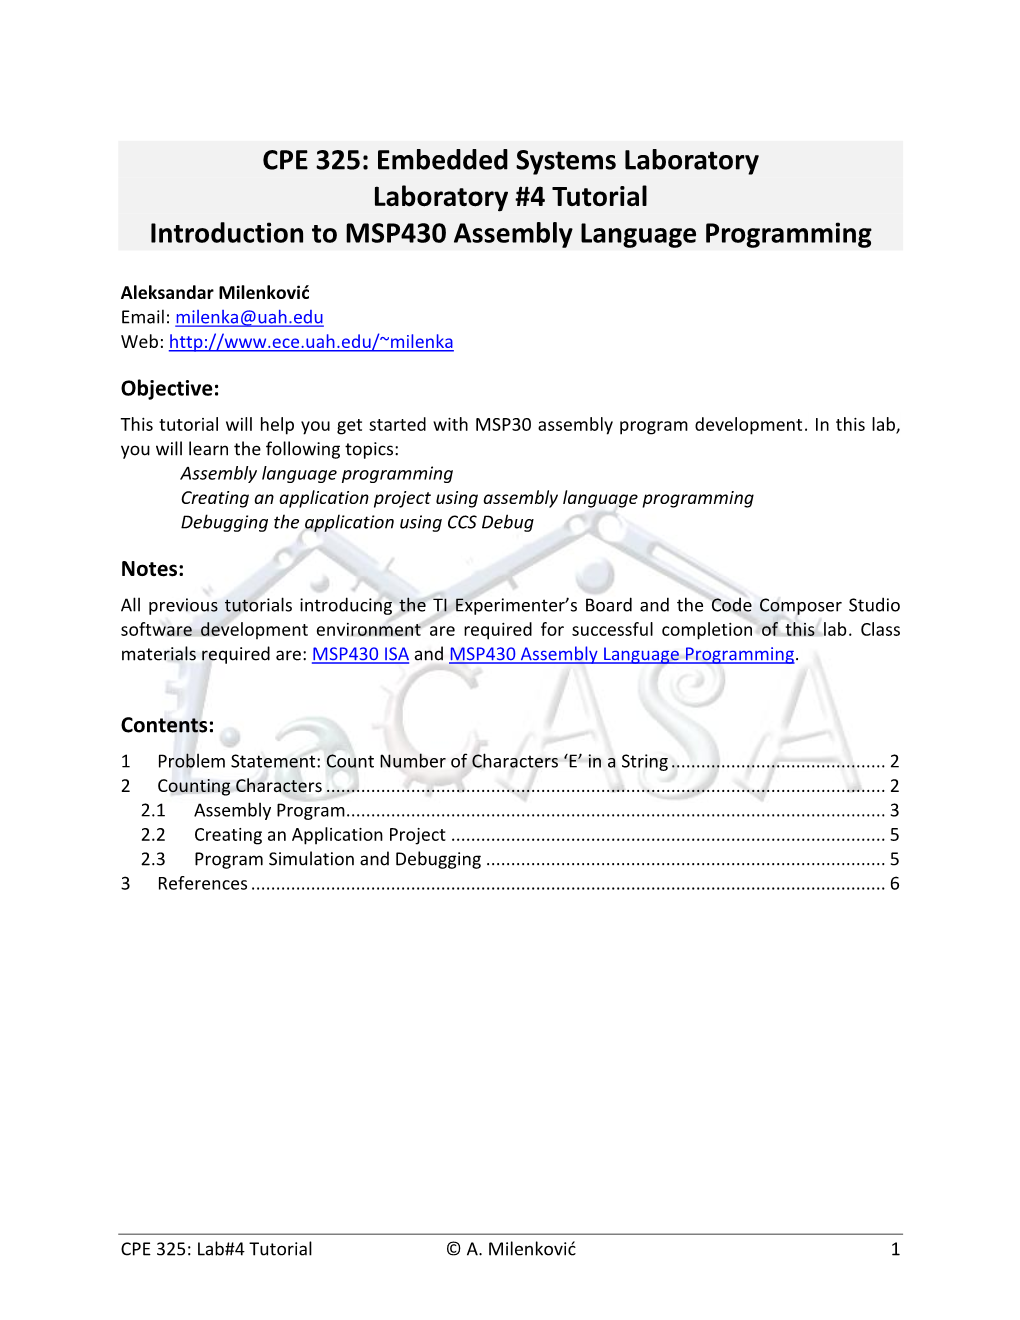 CPE 325: Embedded Systems Laboratory Laboratory #4 Tutorial Introduction to MSP430 Assembly Language Programming